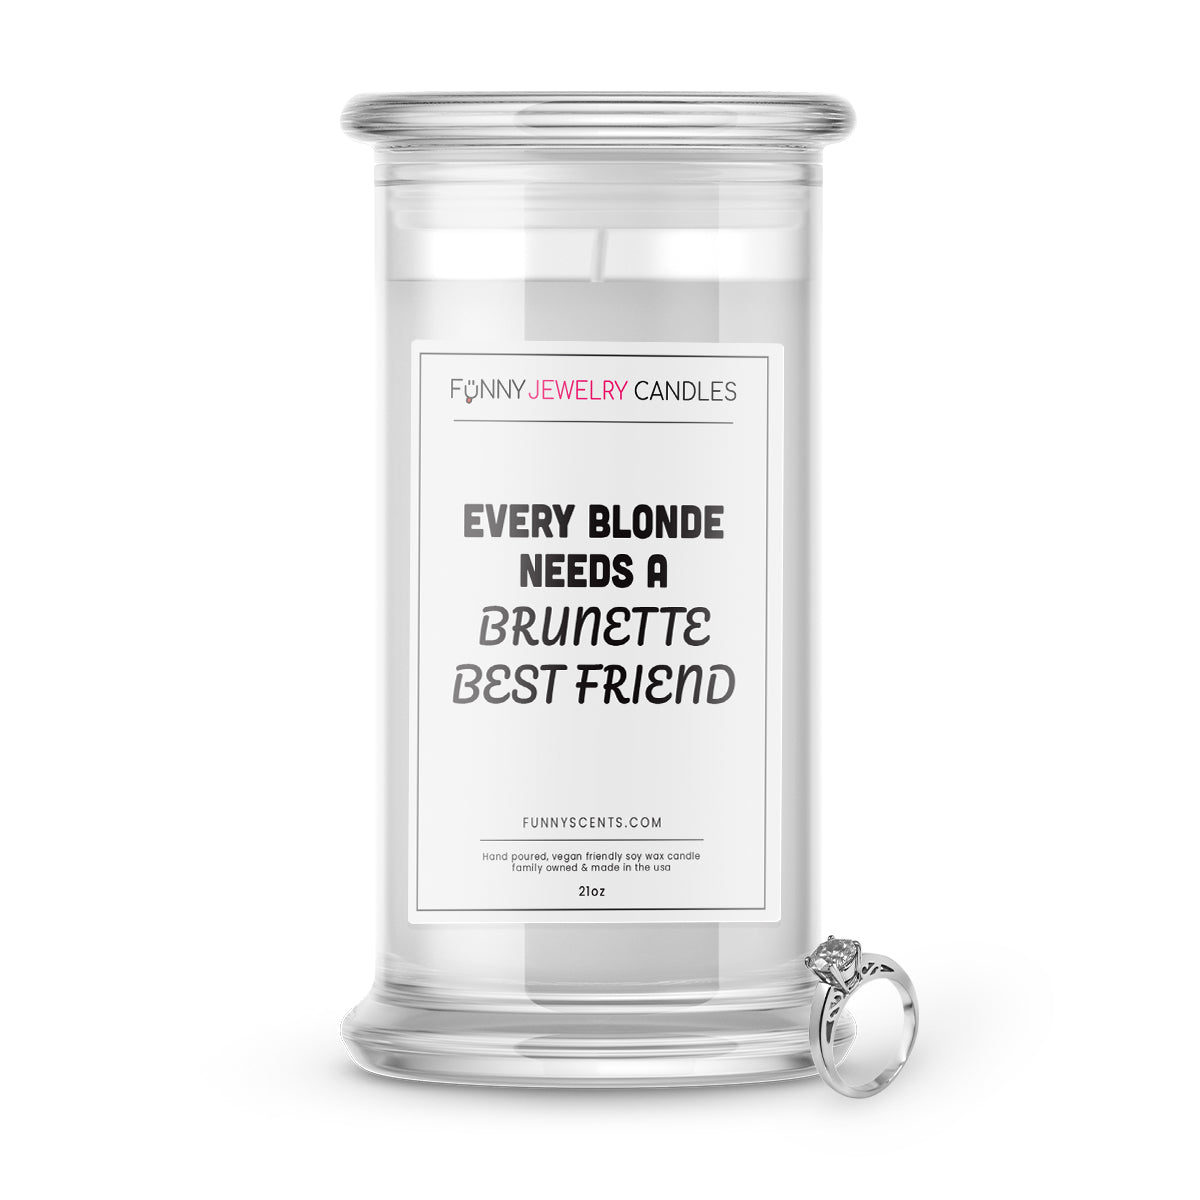 Every Blonde Needs a Brunette Best Friend Jewelry Funny Candles